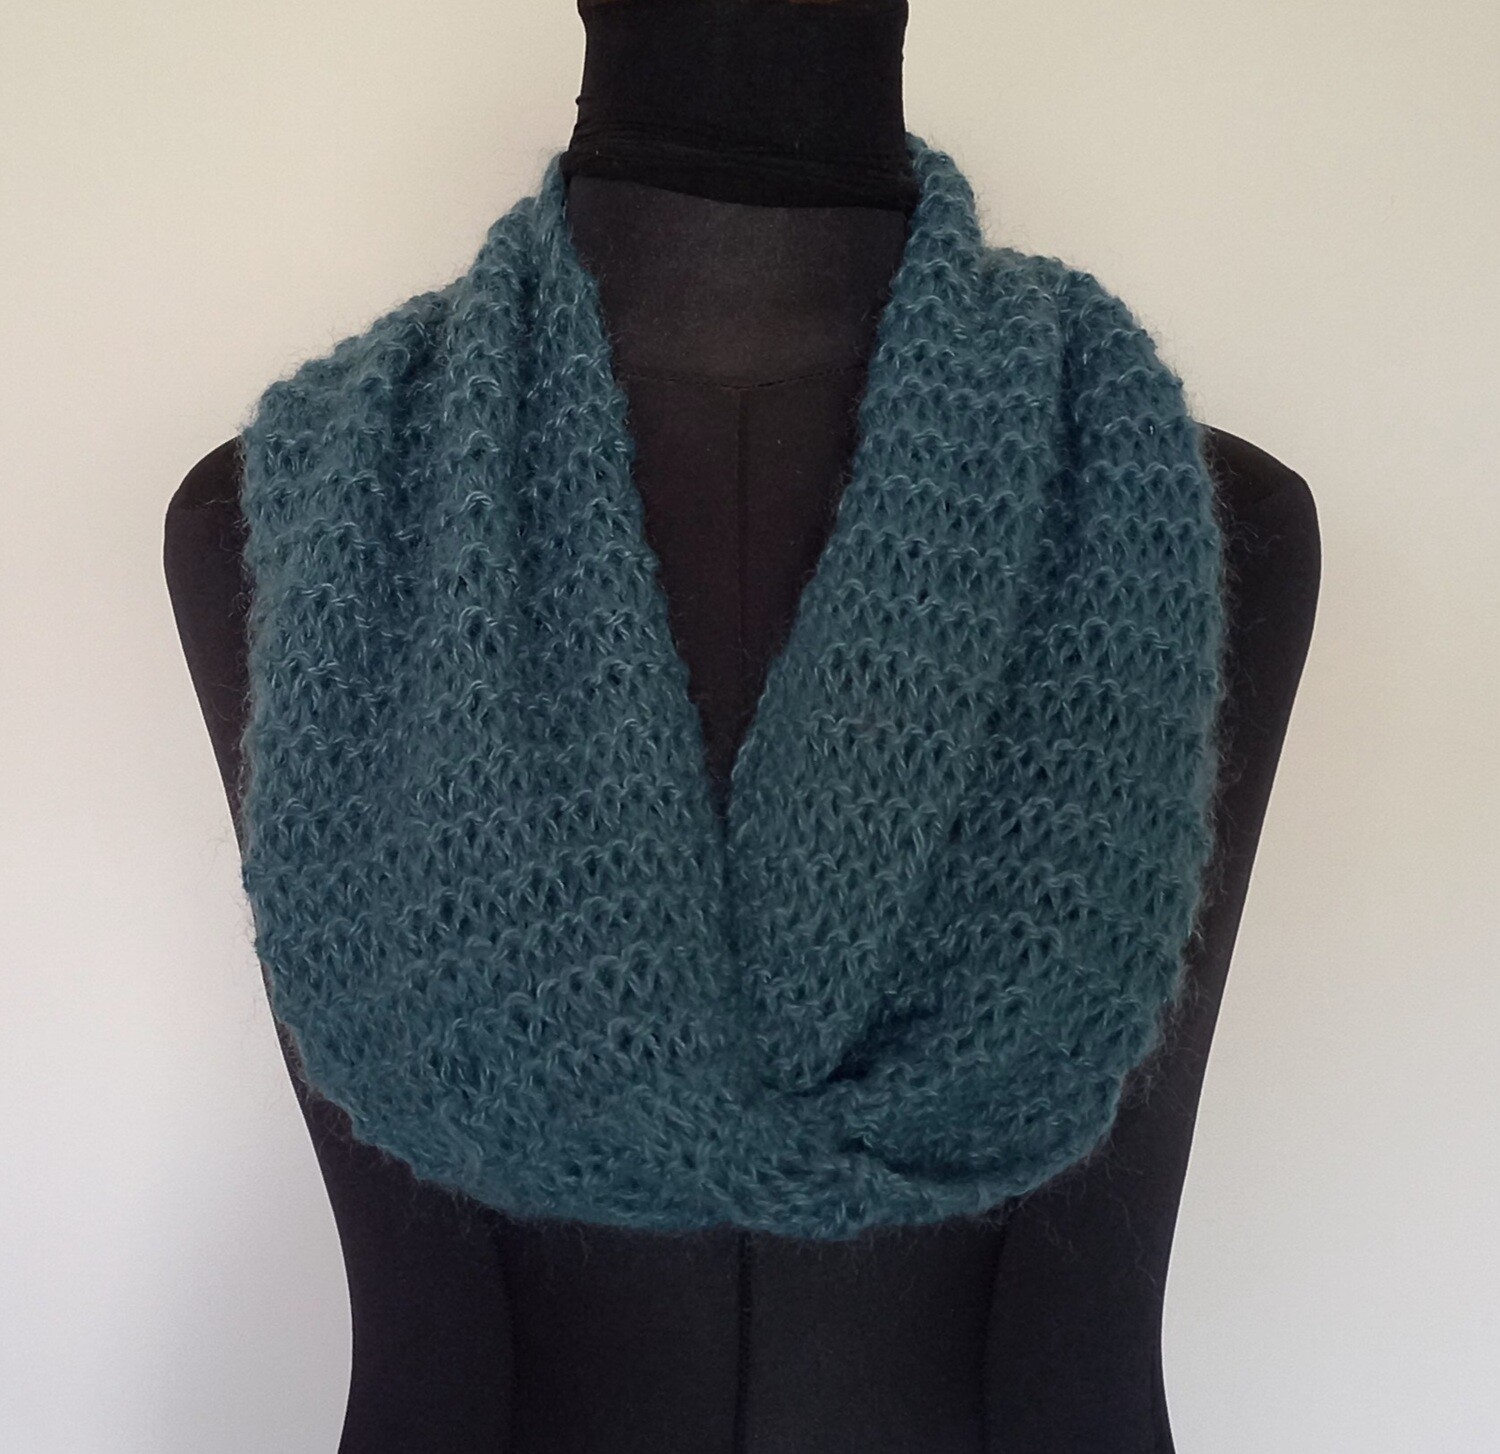 Knit Infinity Scarf in Petroleum Blue Mohair